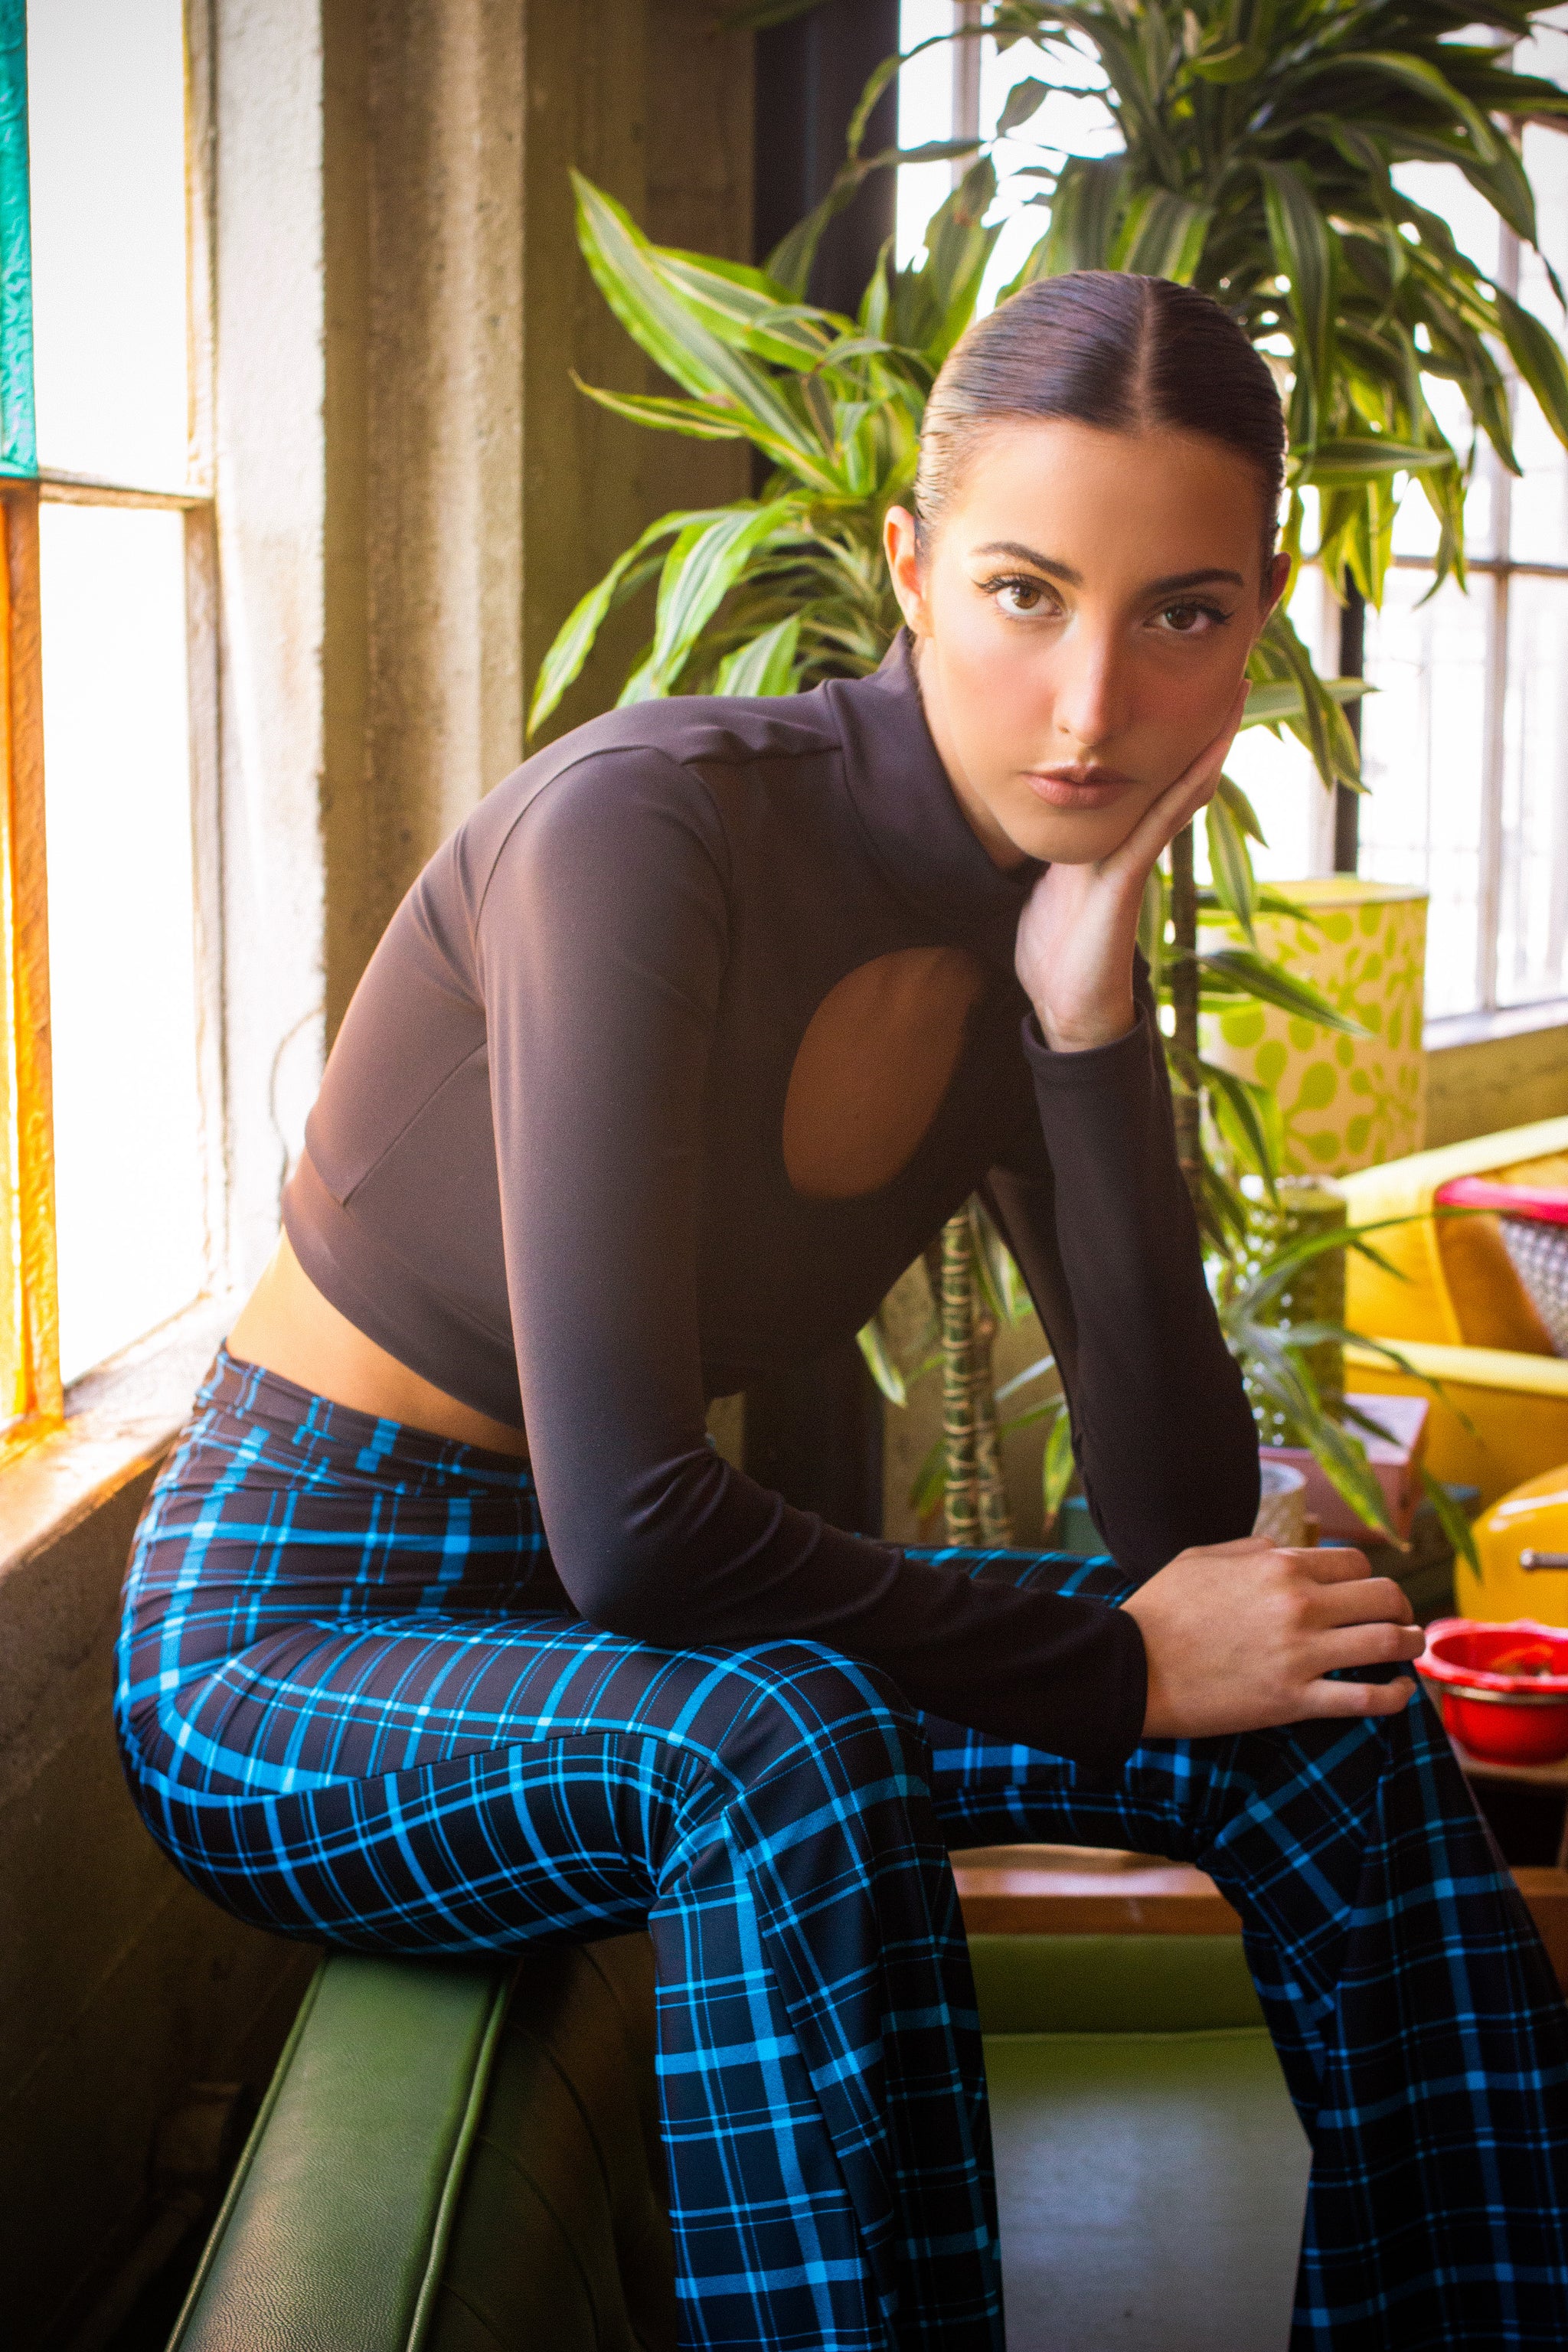 Retro Plaid Flare Pants in Black and Turquoise - The Sugarpuss Collection